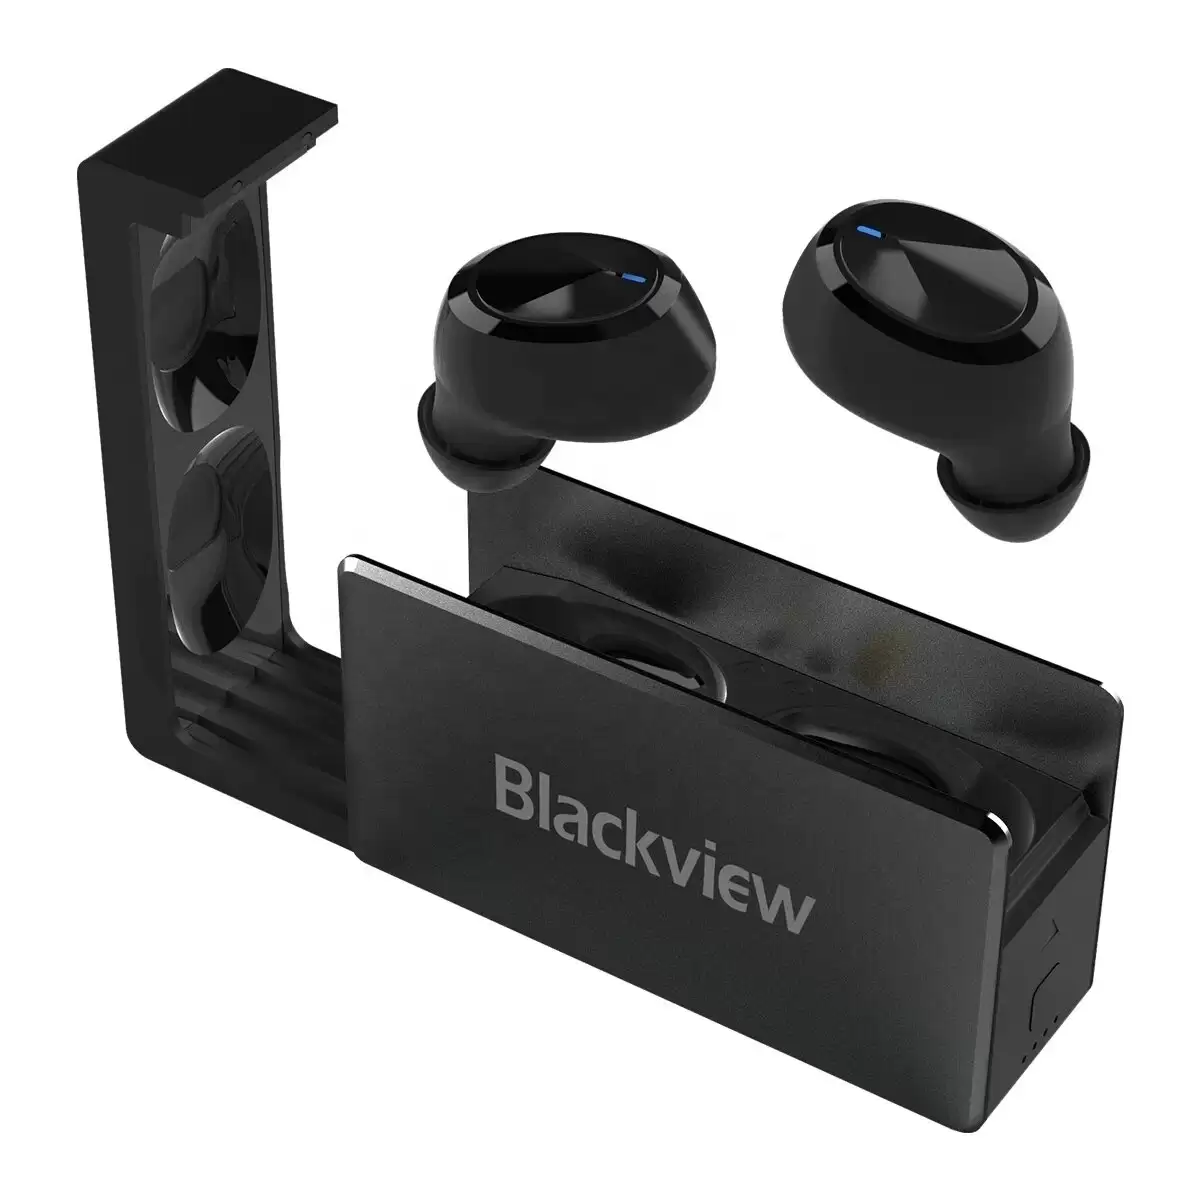 Order In Just $26.99 Blackview Airbuds 2 Wireless Bluetooth 5.0 Earphones With This Coupon At Banggood